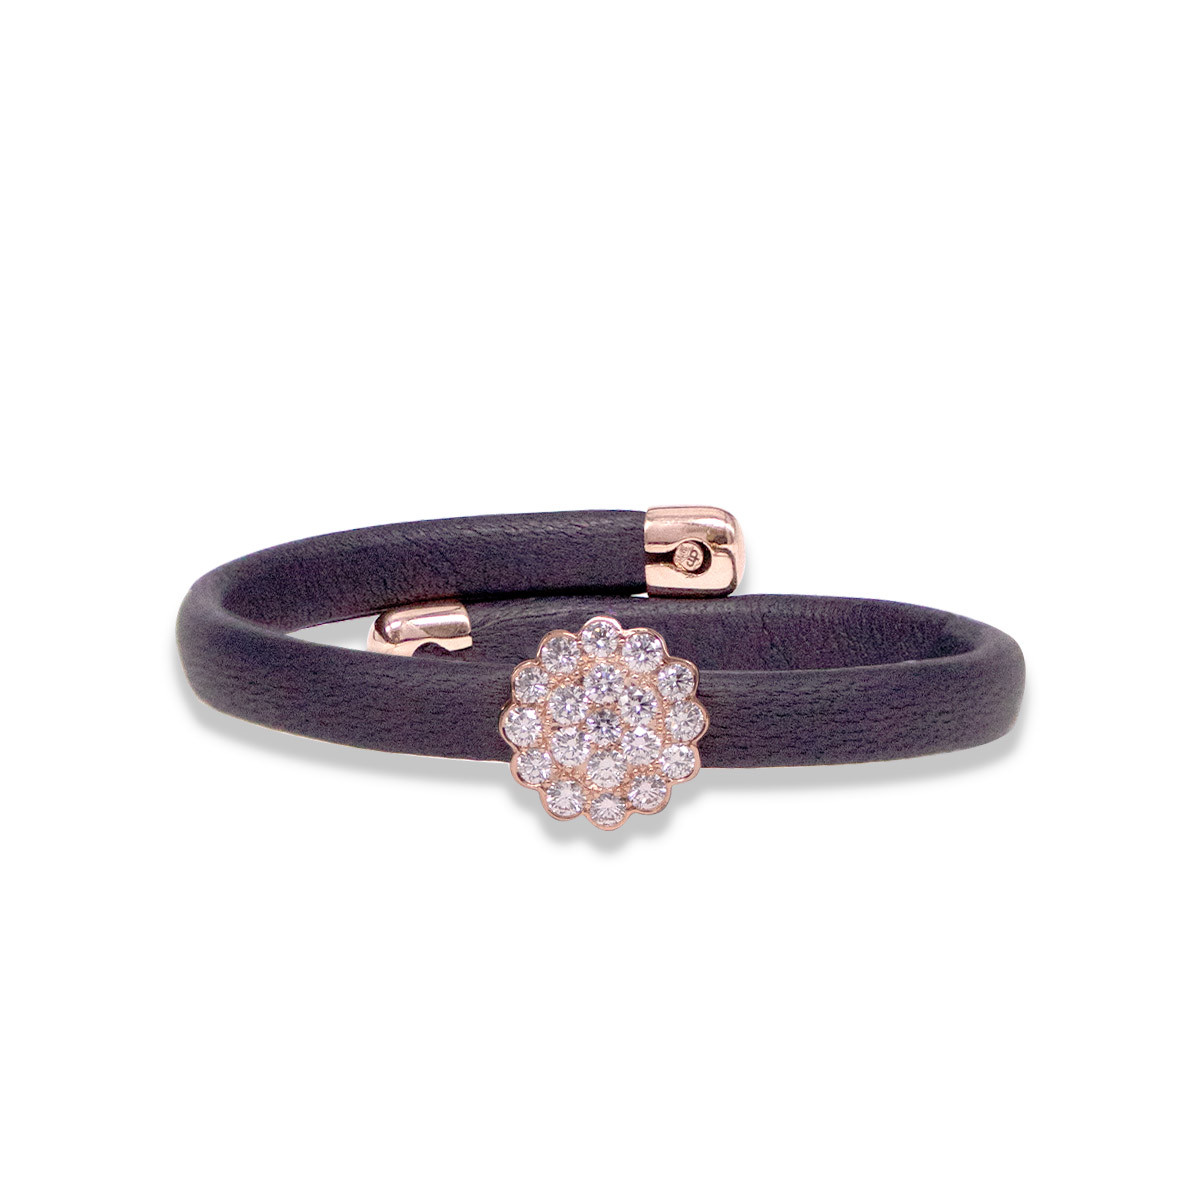 BLACK LEATHER BRACELET WITH ROSE GOLD AND DIAMONDS